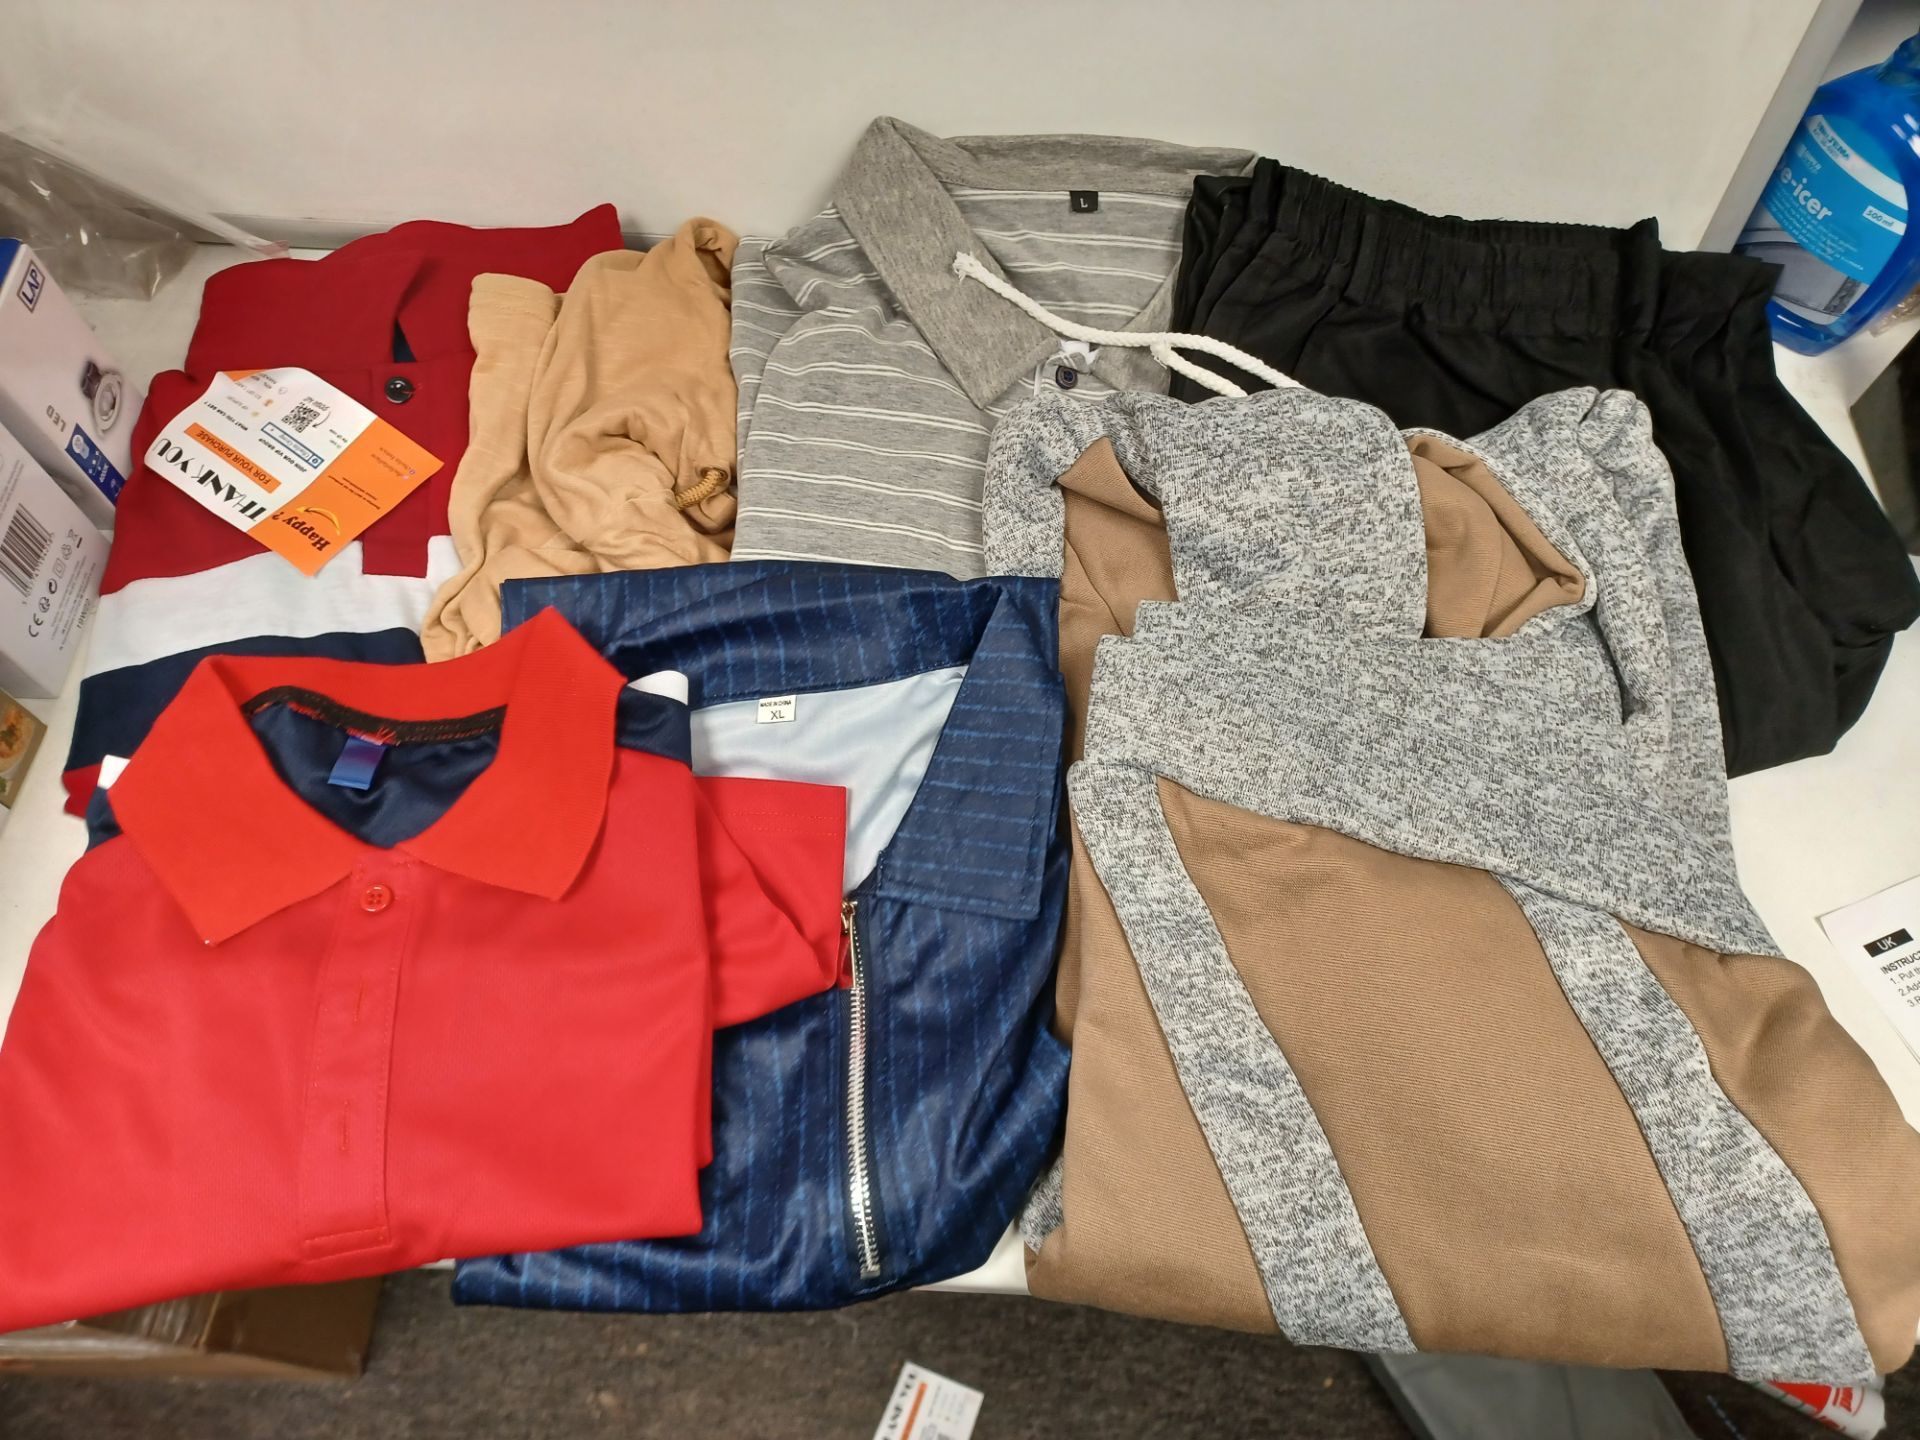 15 X BRAND NEW ASSORTED MENSWEAR LOT INCLUDING T SHIRTS, JUMPERS, HOODIES ETC